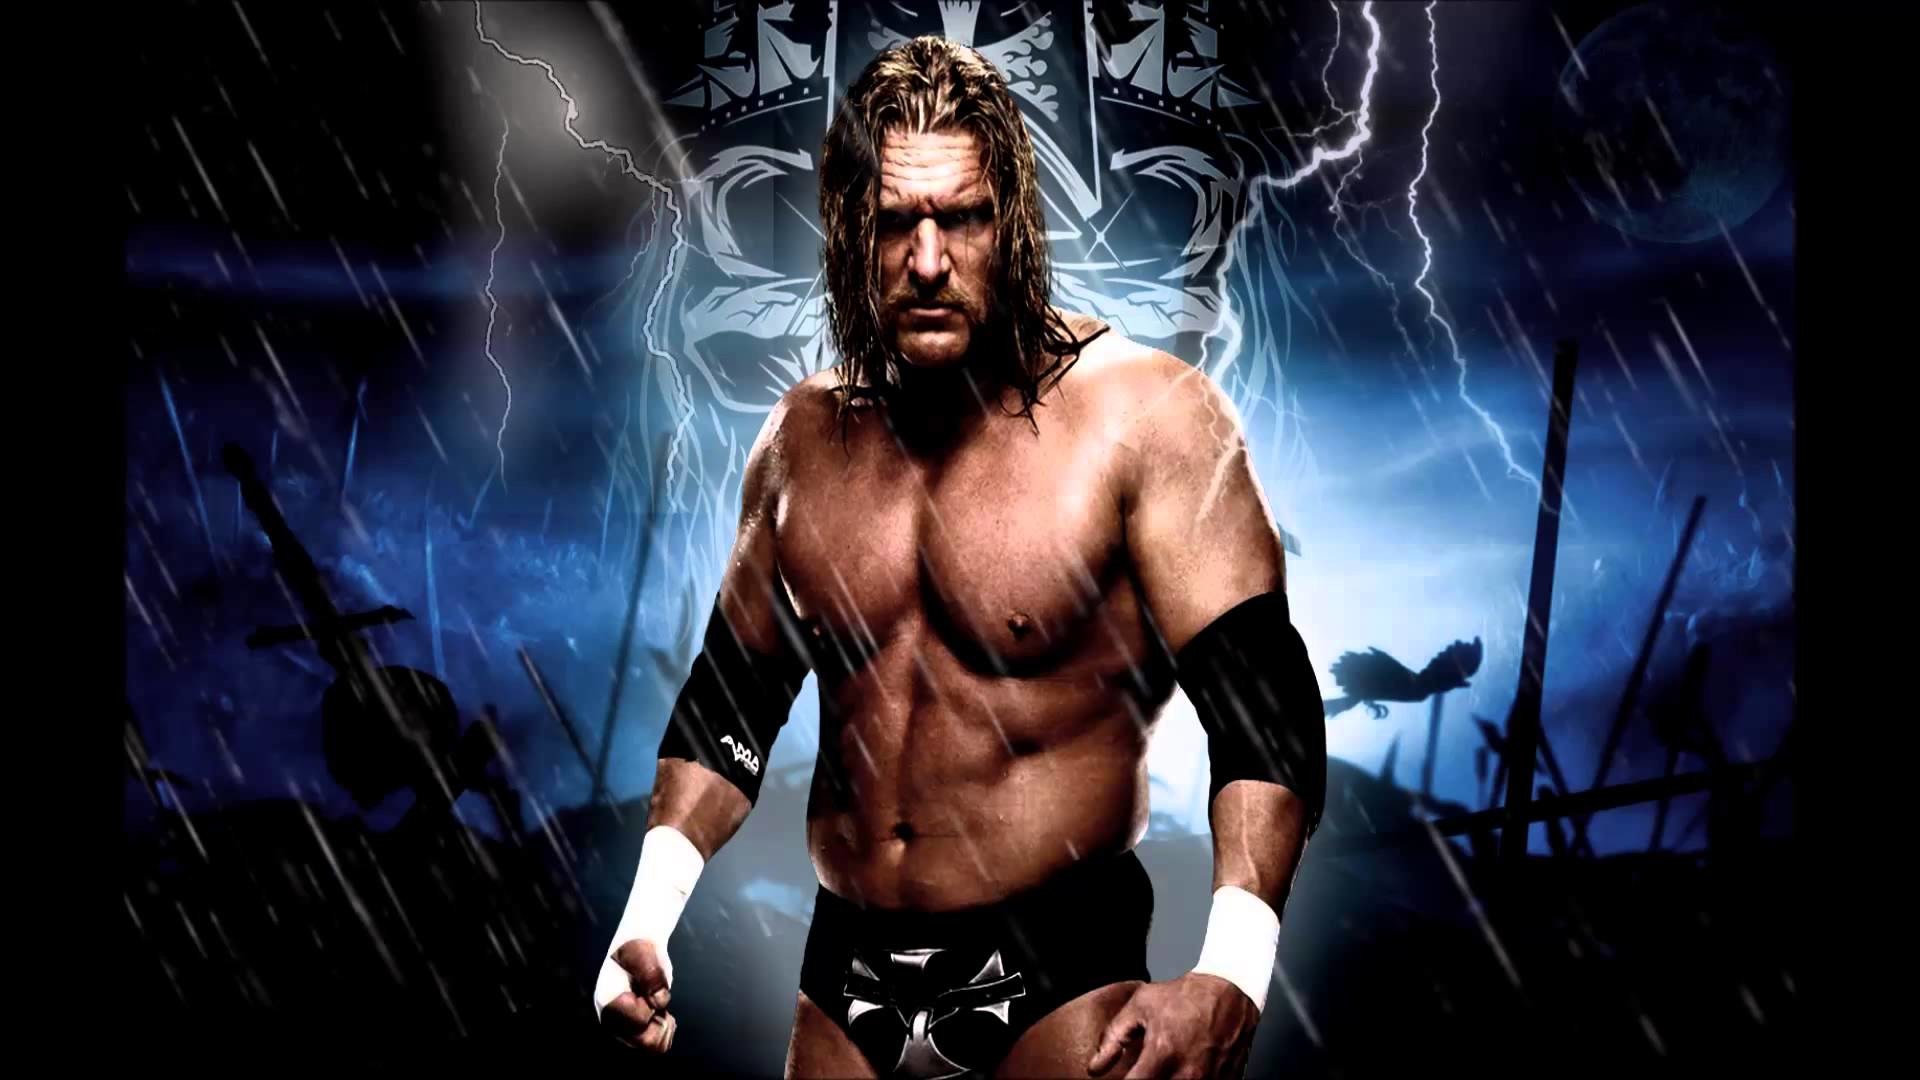 1920x1080 ... WWE Wallpapers, WWE PPV's Triple H responds to Seth Rollins' TakeOver  invasion: WWE.com .